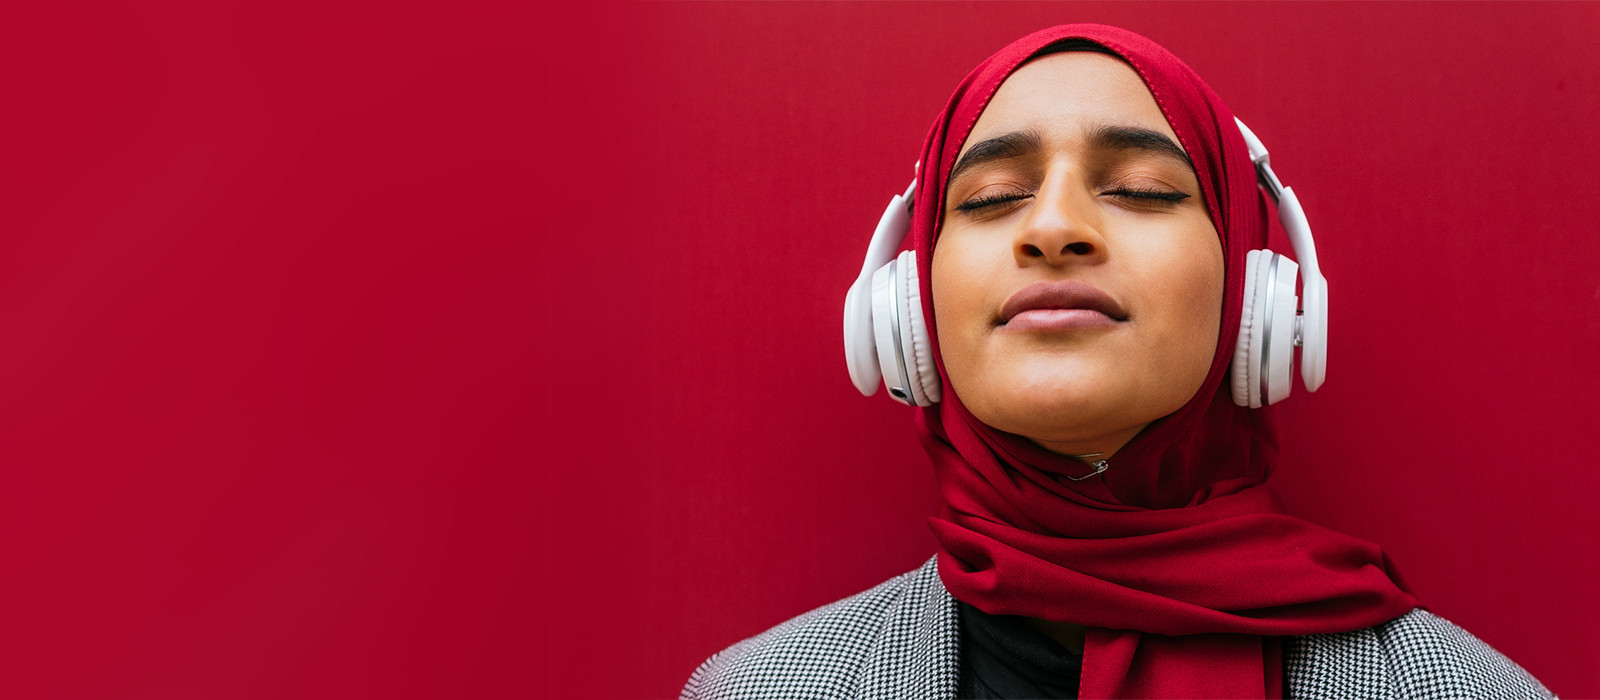 Woman with eyes closed, listening to music